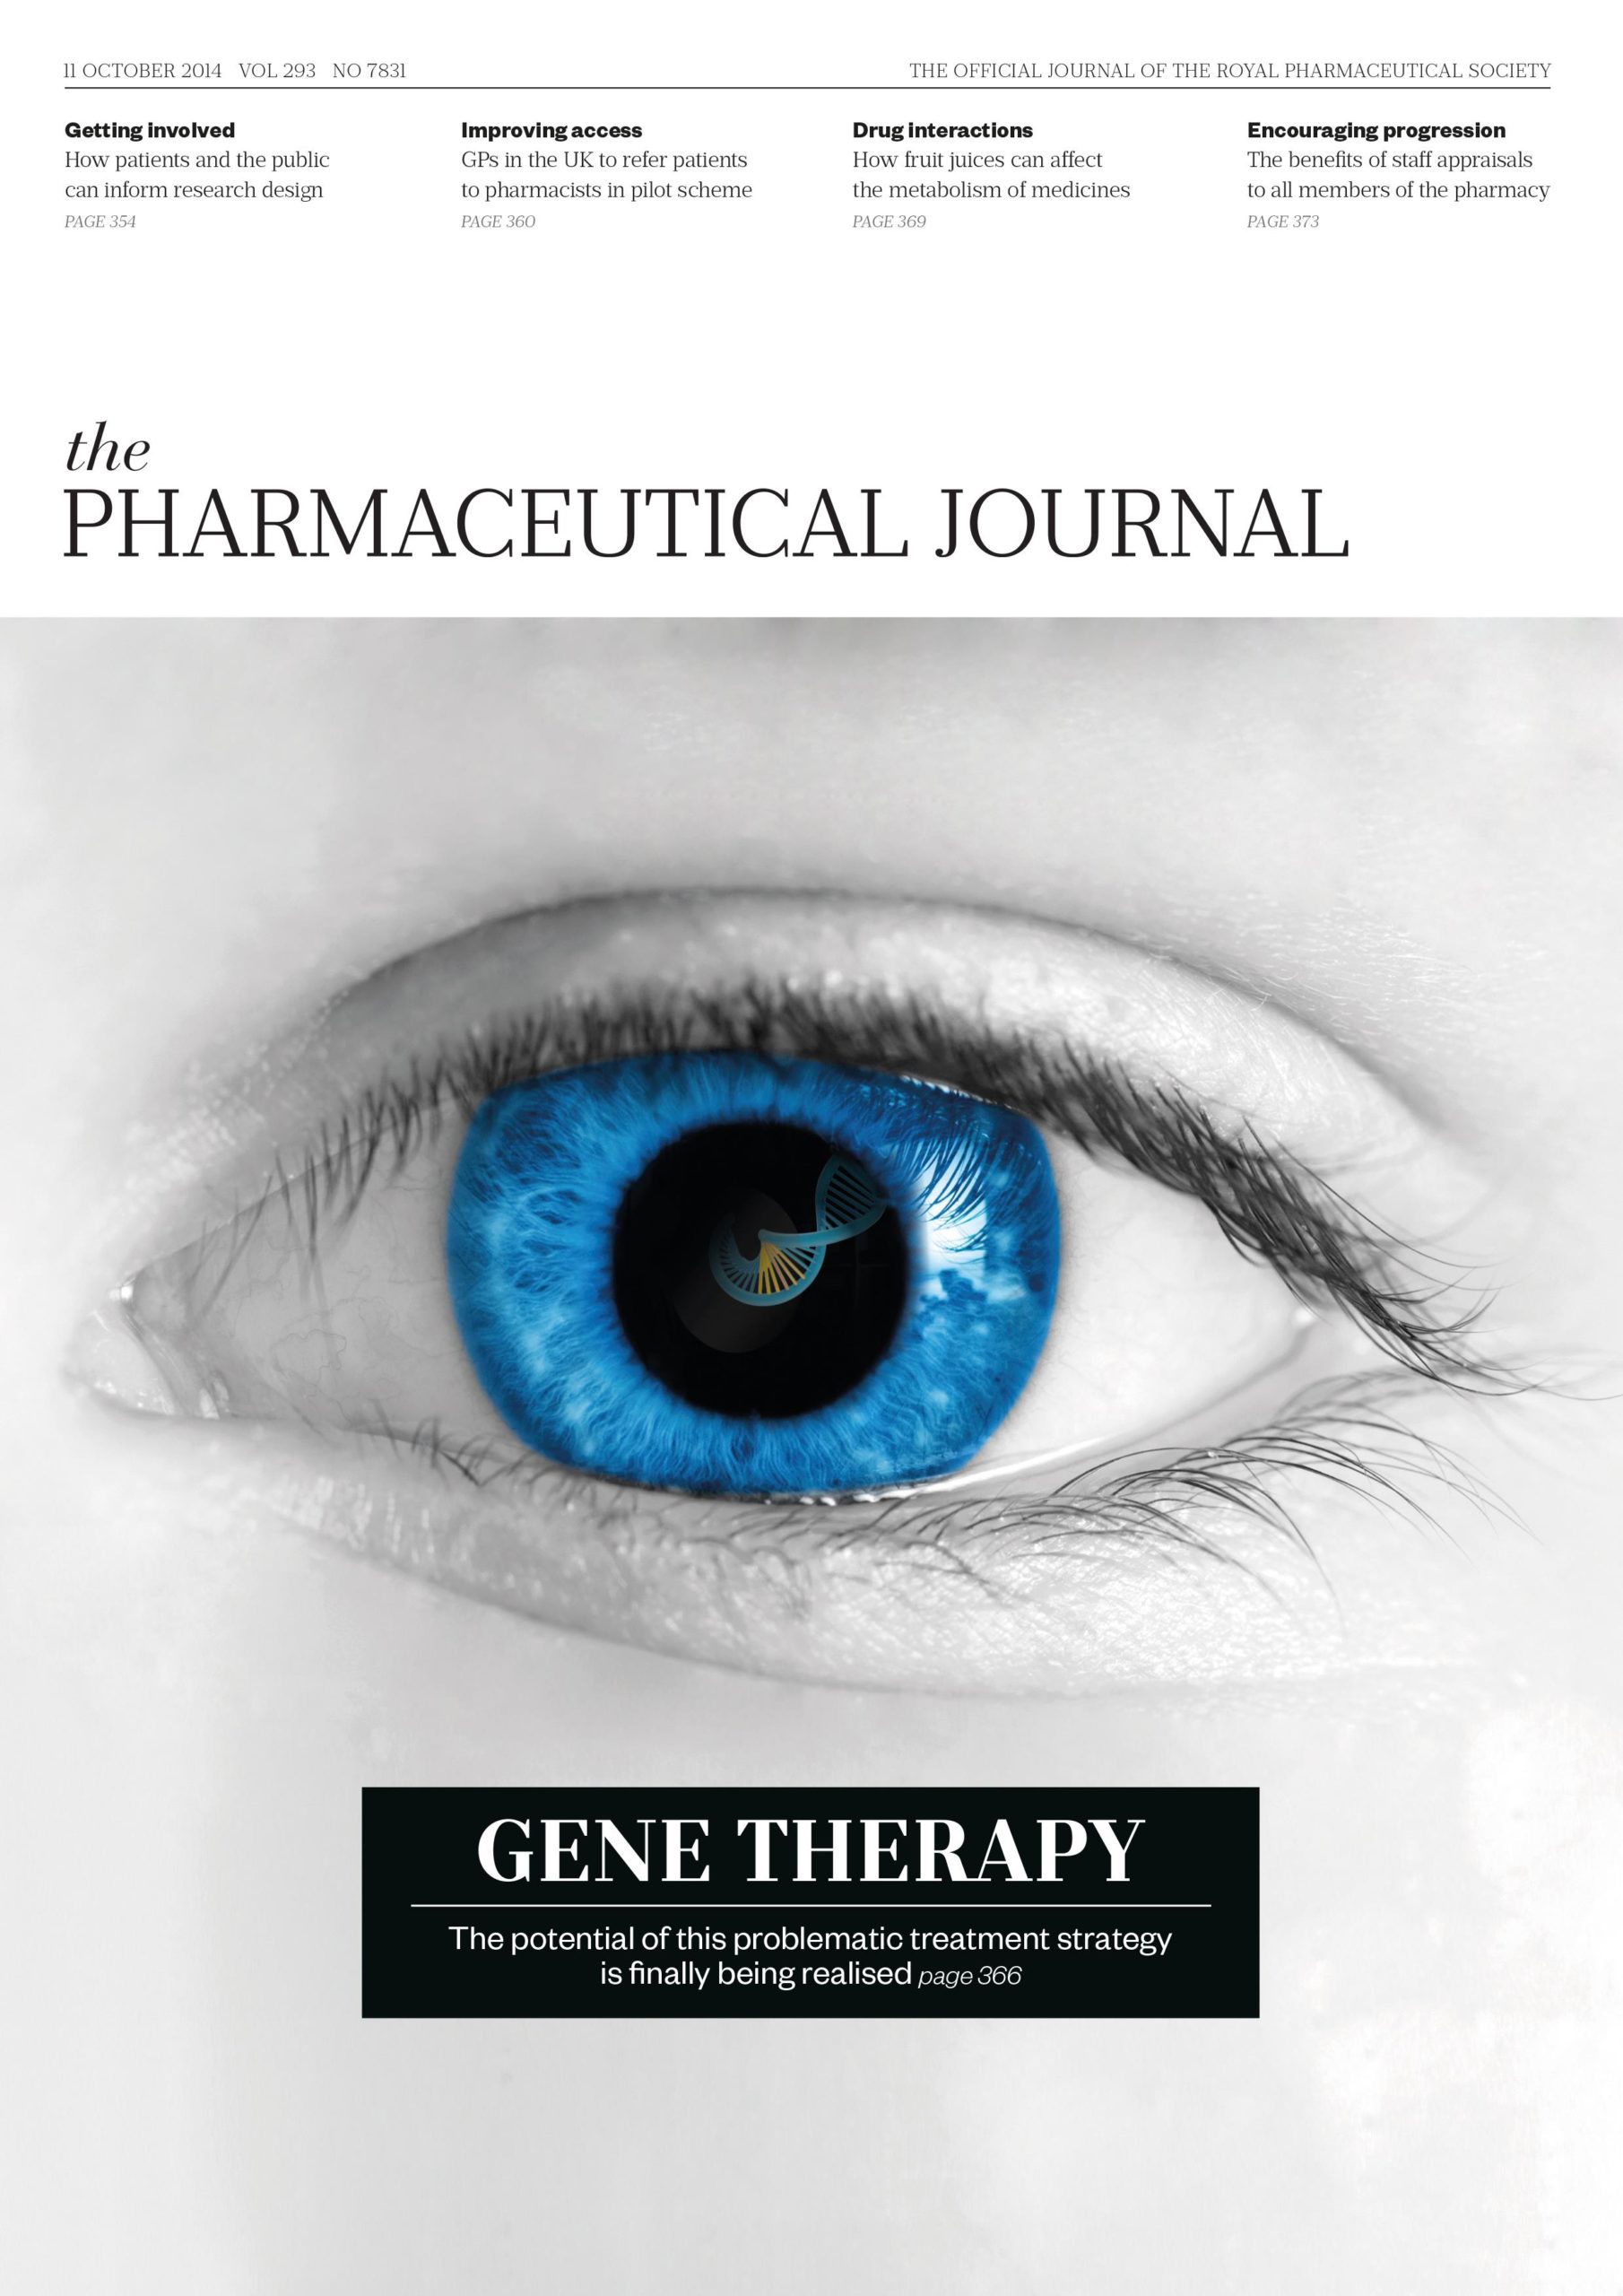 Publication issue cover for PJ, 11 October 2014, Vol 293, No 7831